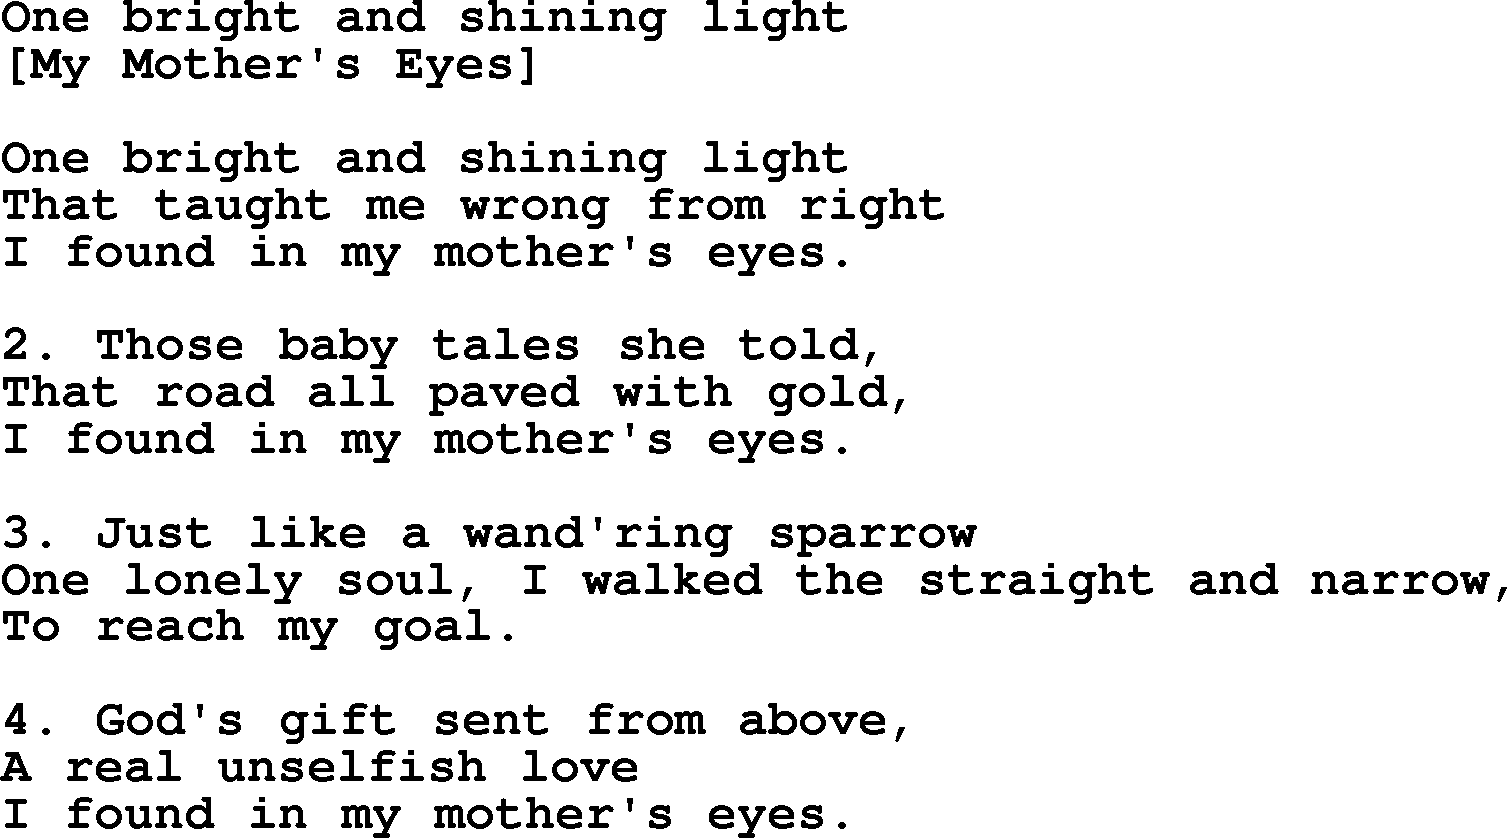 Old American Song: One Bright And Shining Light, lyrics